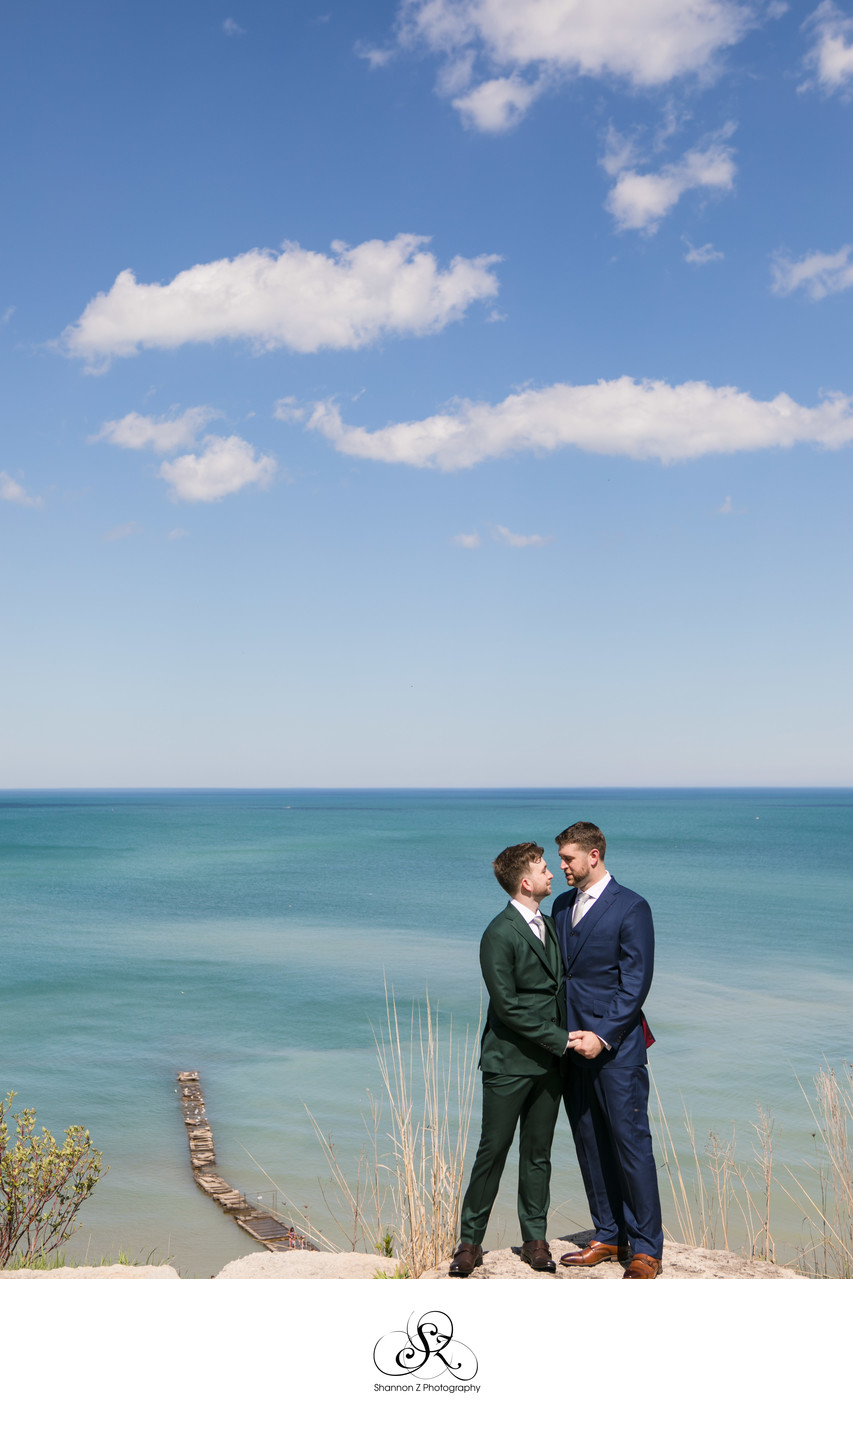 Two Grooms: LGBTQ Friendly Wedding Photography